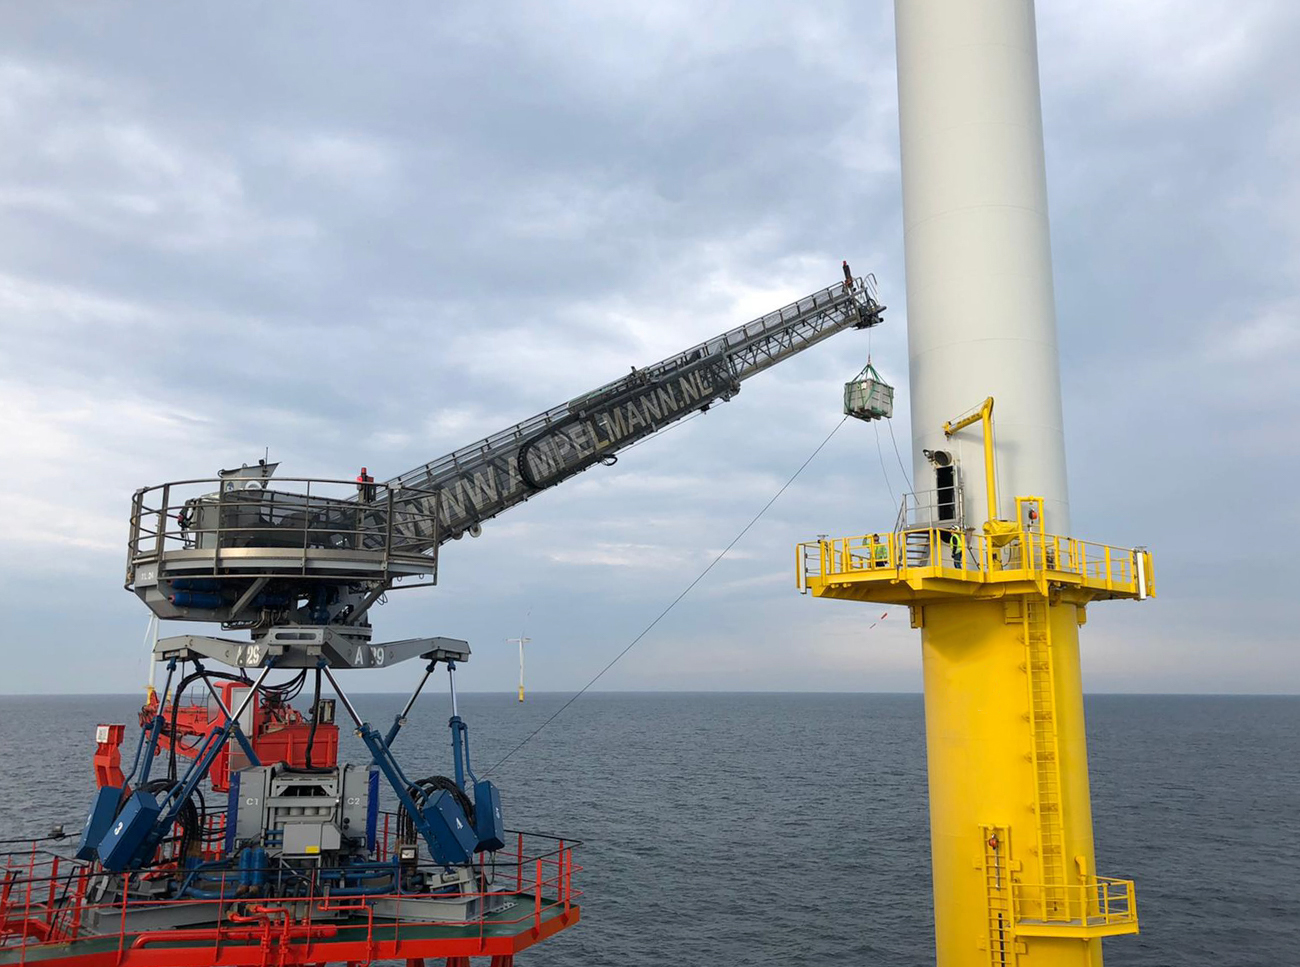 Ampelmann signs 13 new contracts in European offshore wind in the first half of 2021